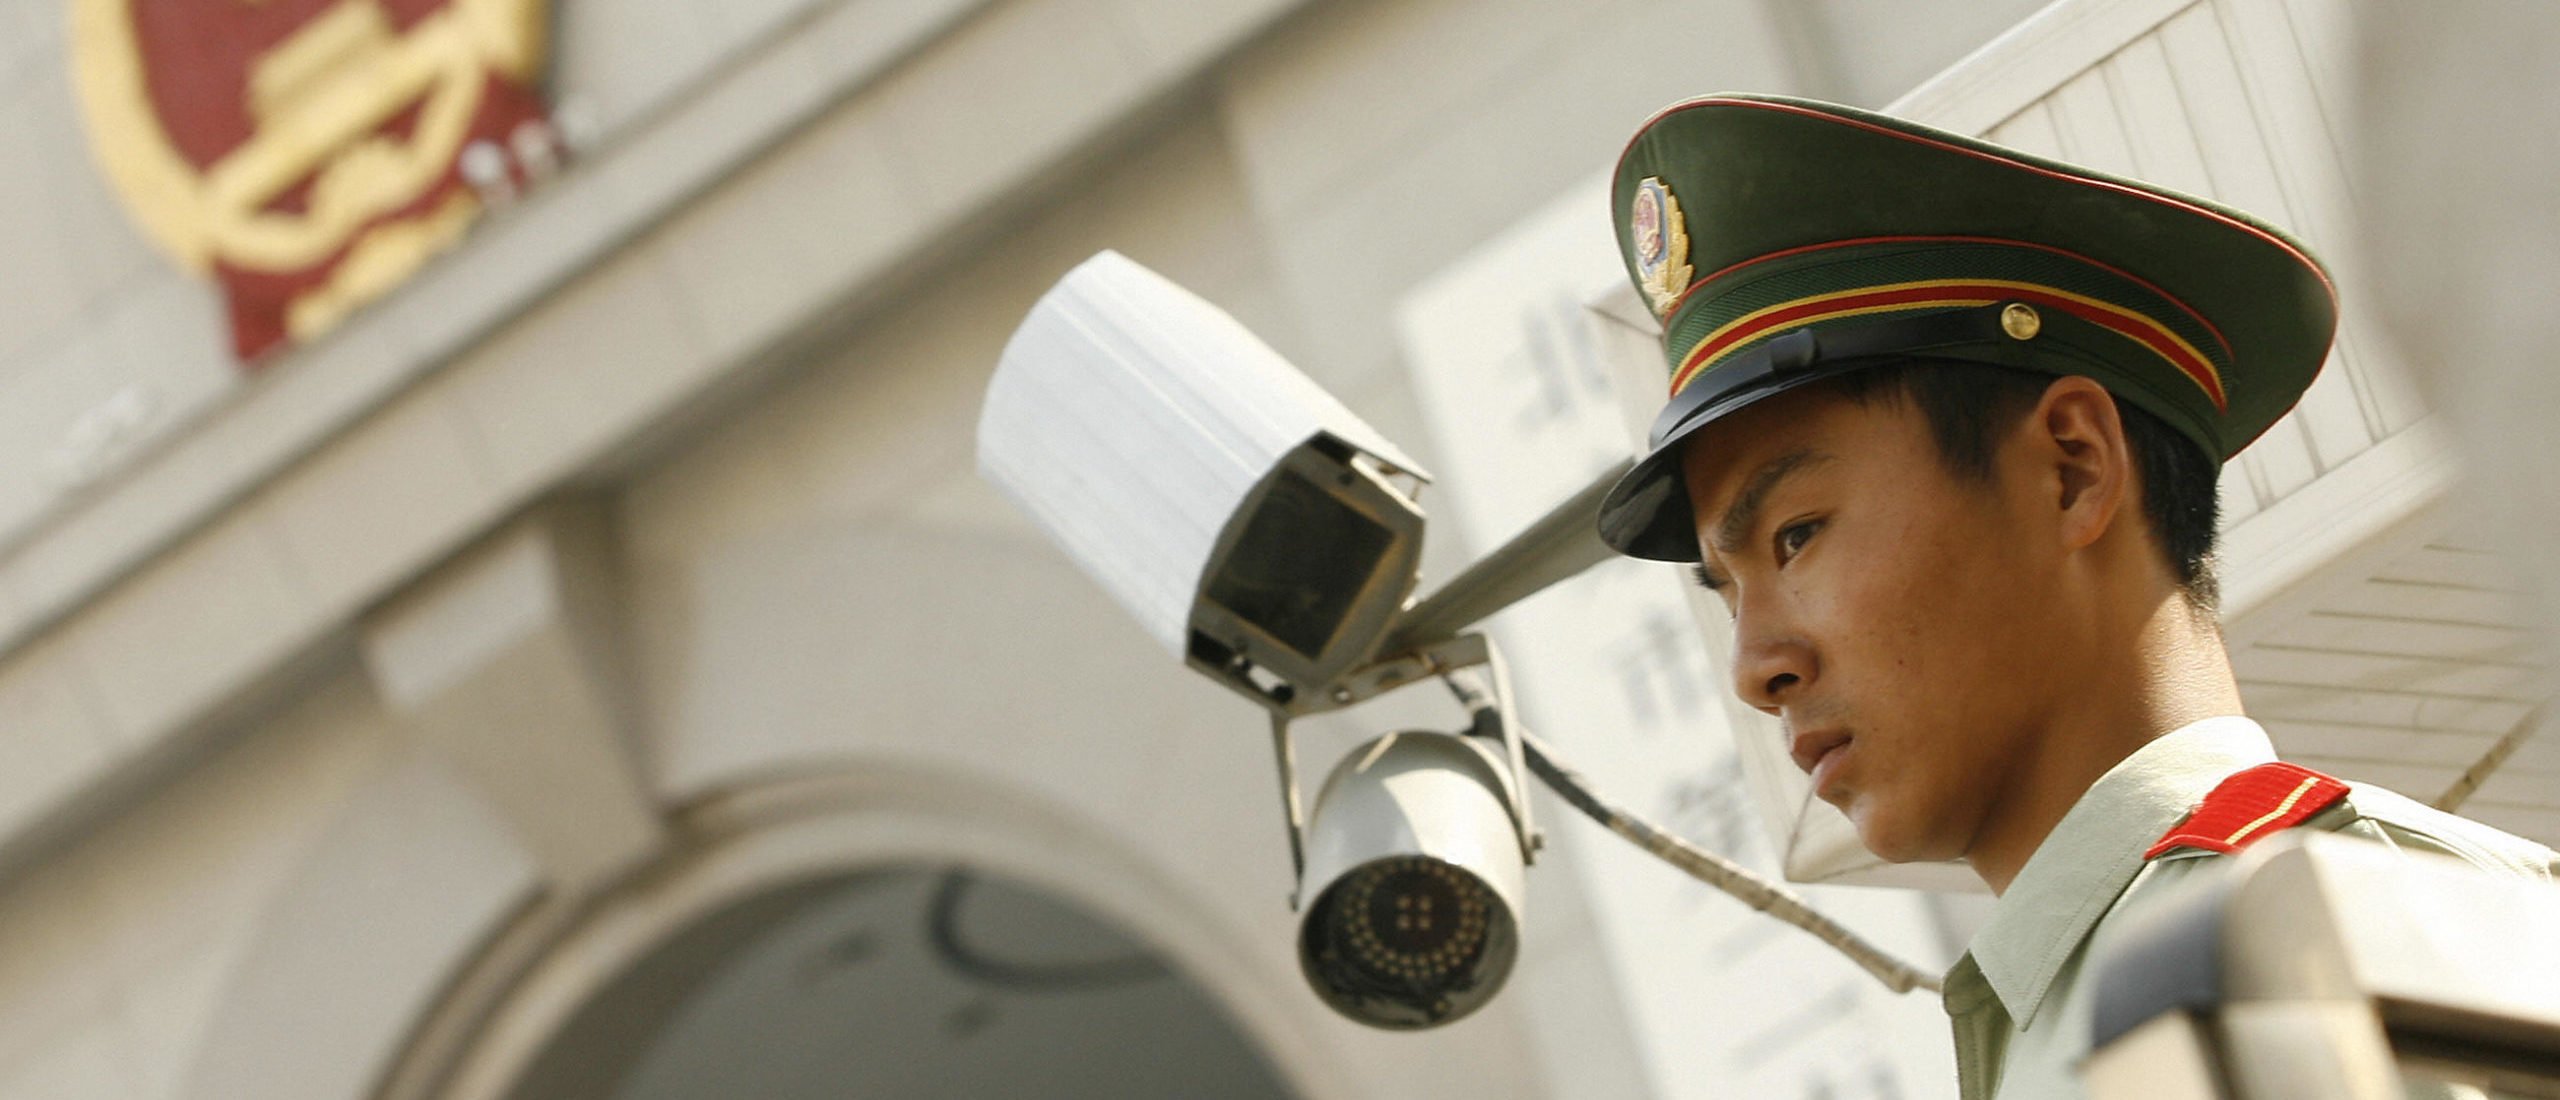 China Is Rapidly Expanding Its Surveillance Capabilities In America’s Backyard, Report Finds